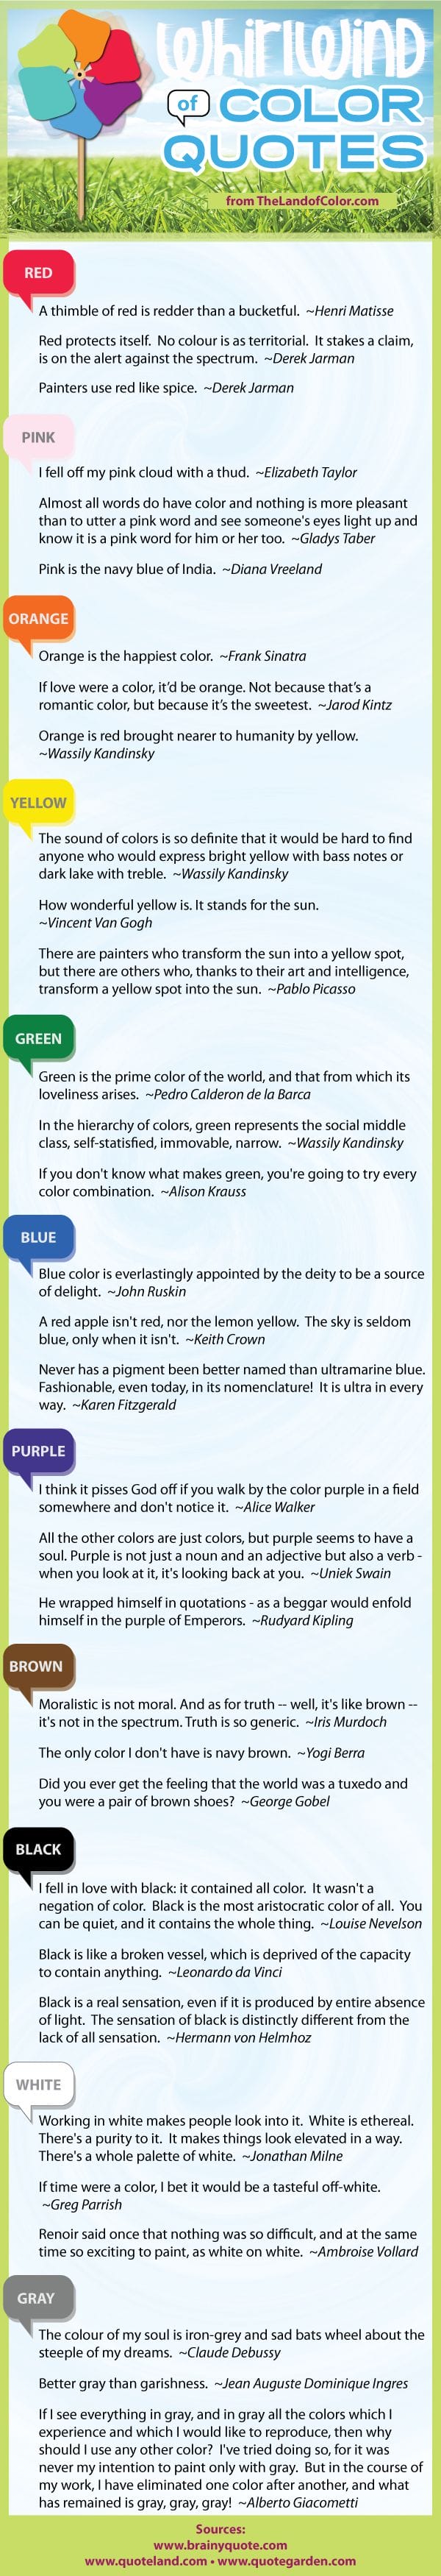 Color-Quotes-Infographic